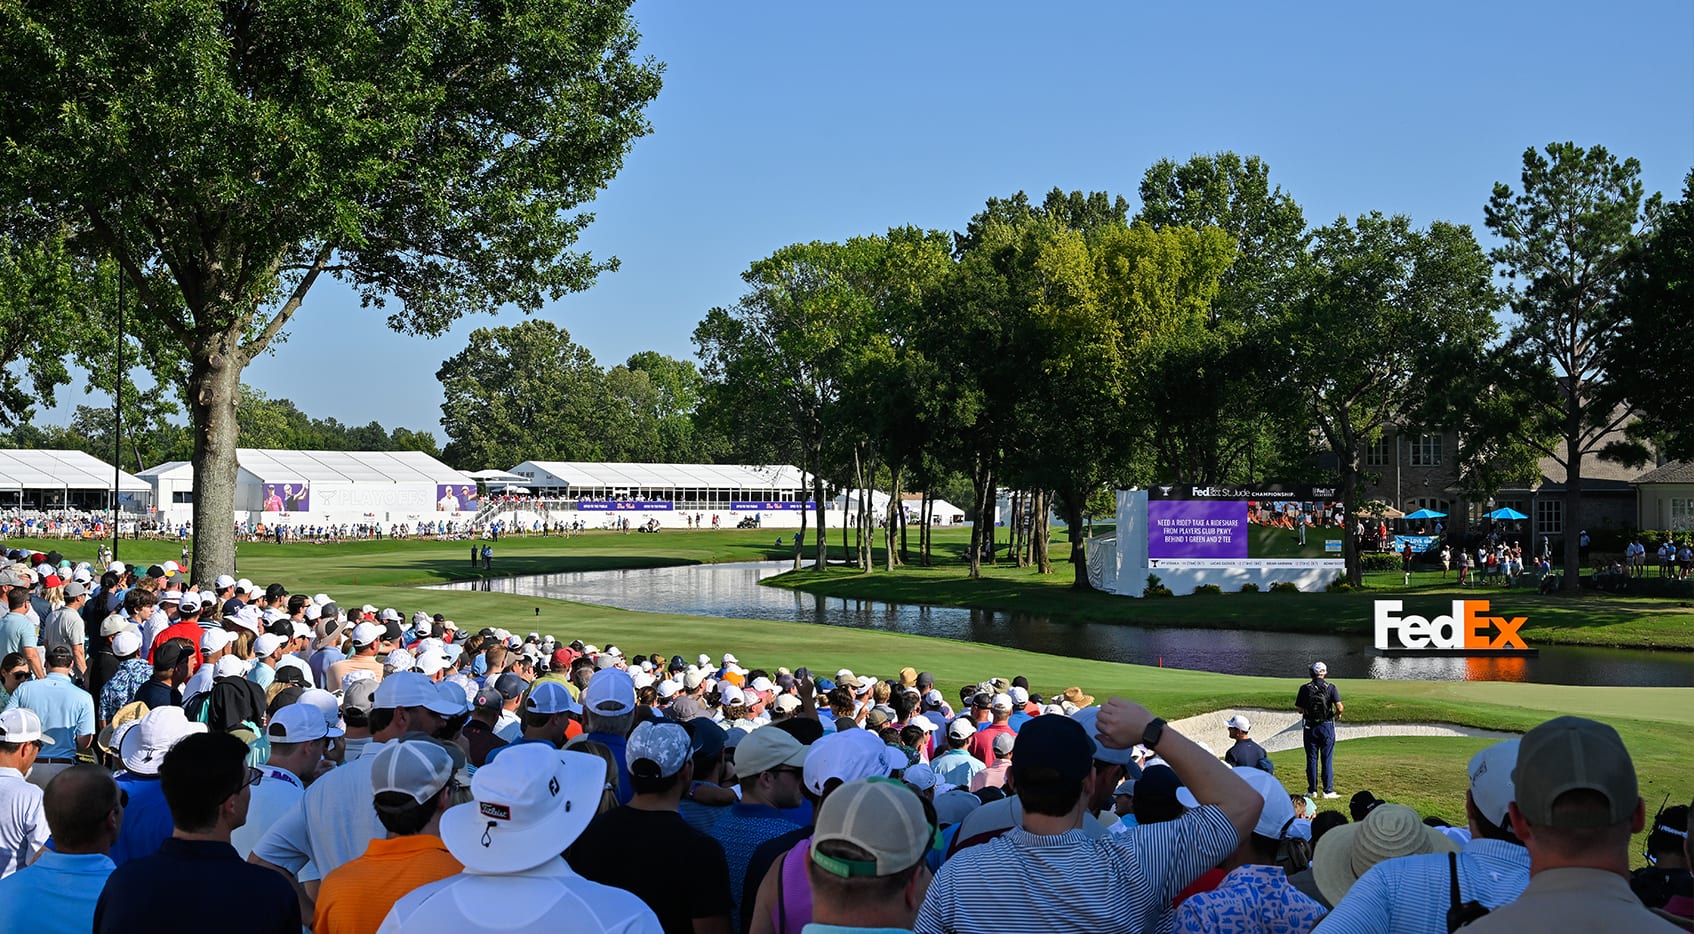 The First Look FedEx St. Jude Championship PGA TOUR